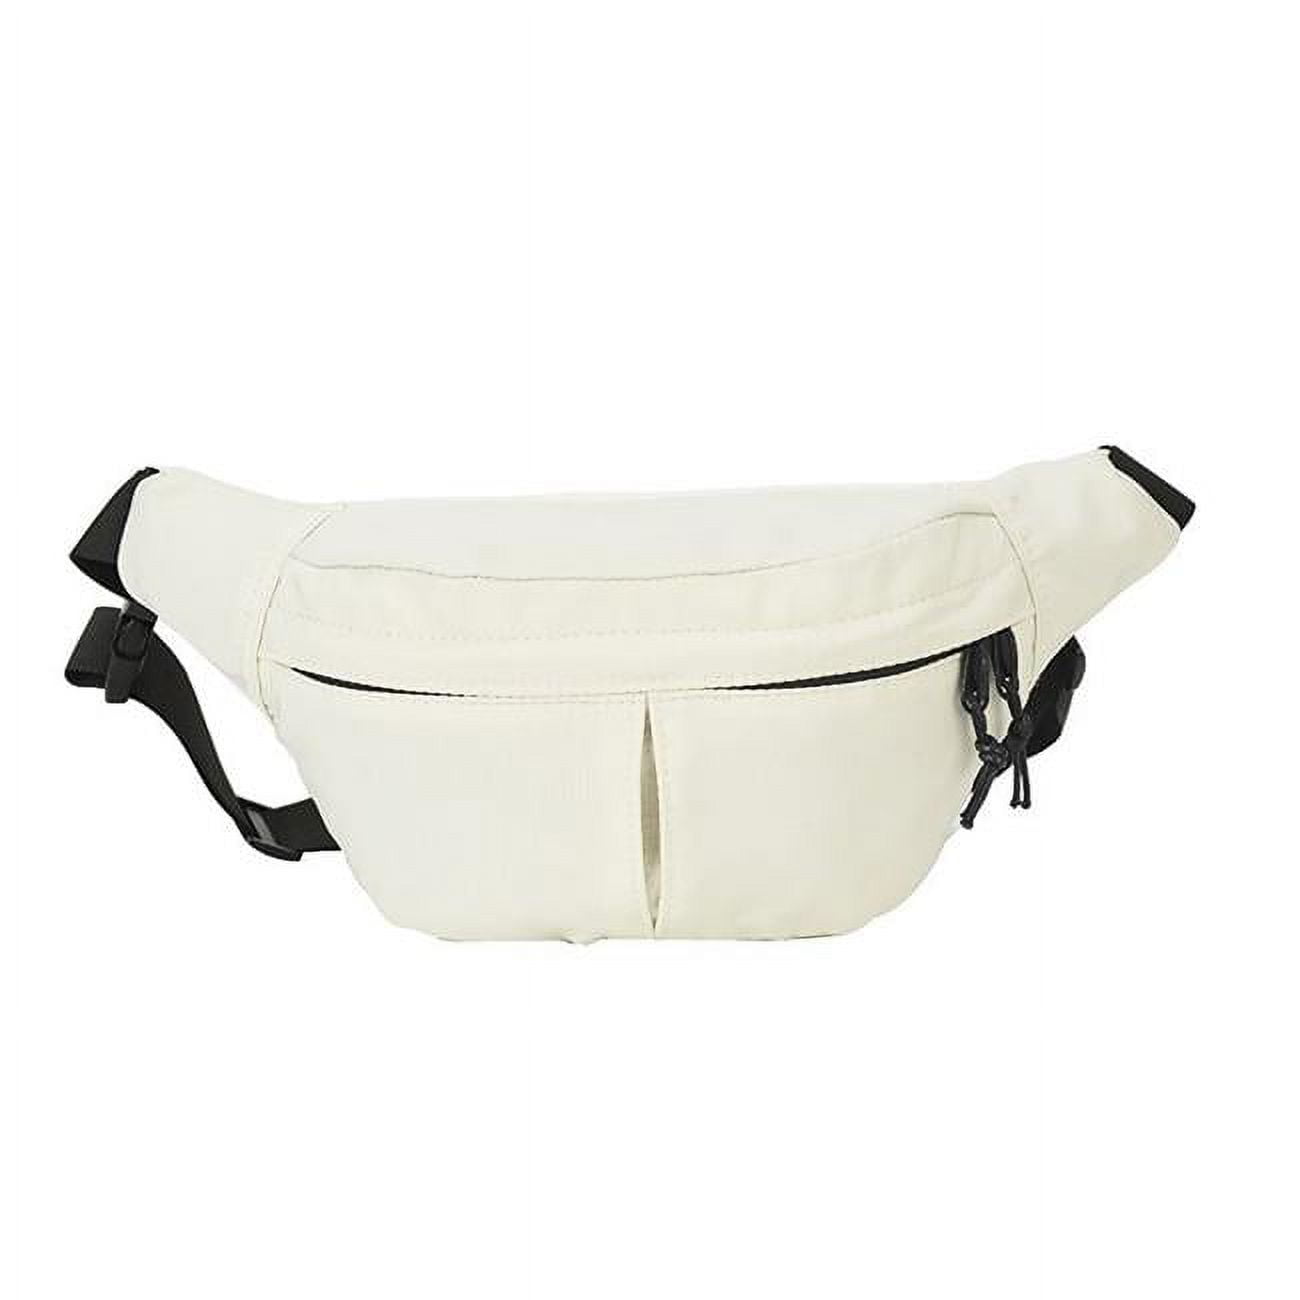 Picture of 3P Experts 3PX-POUCH-WHT Pouch Waist Bag, White